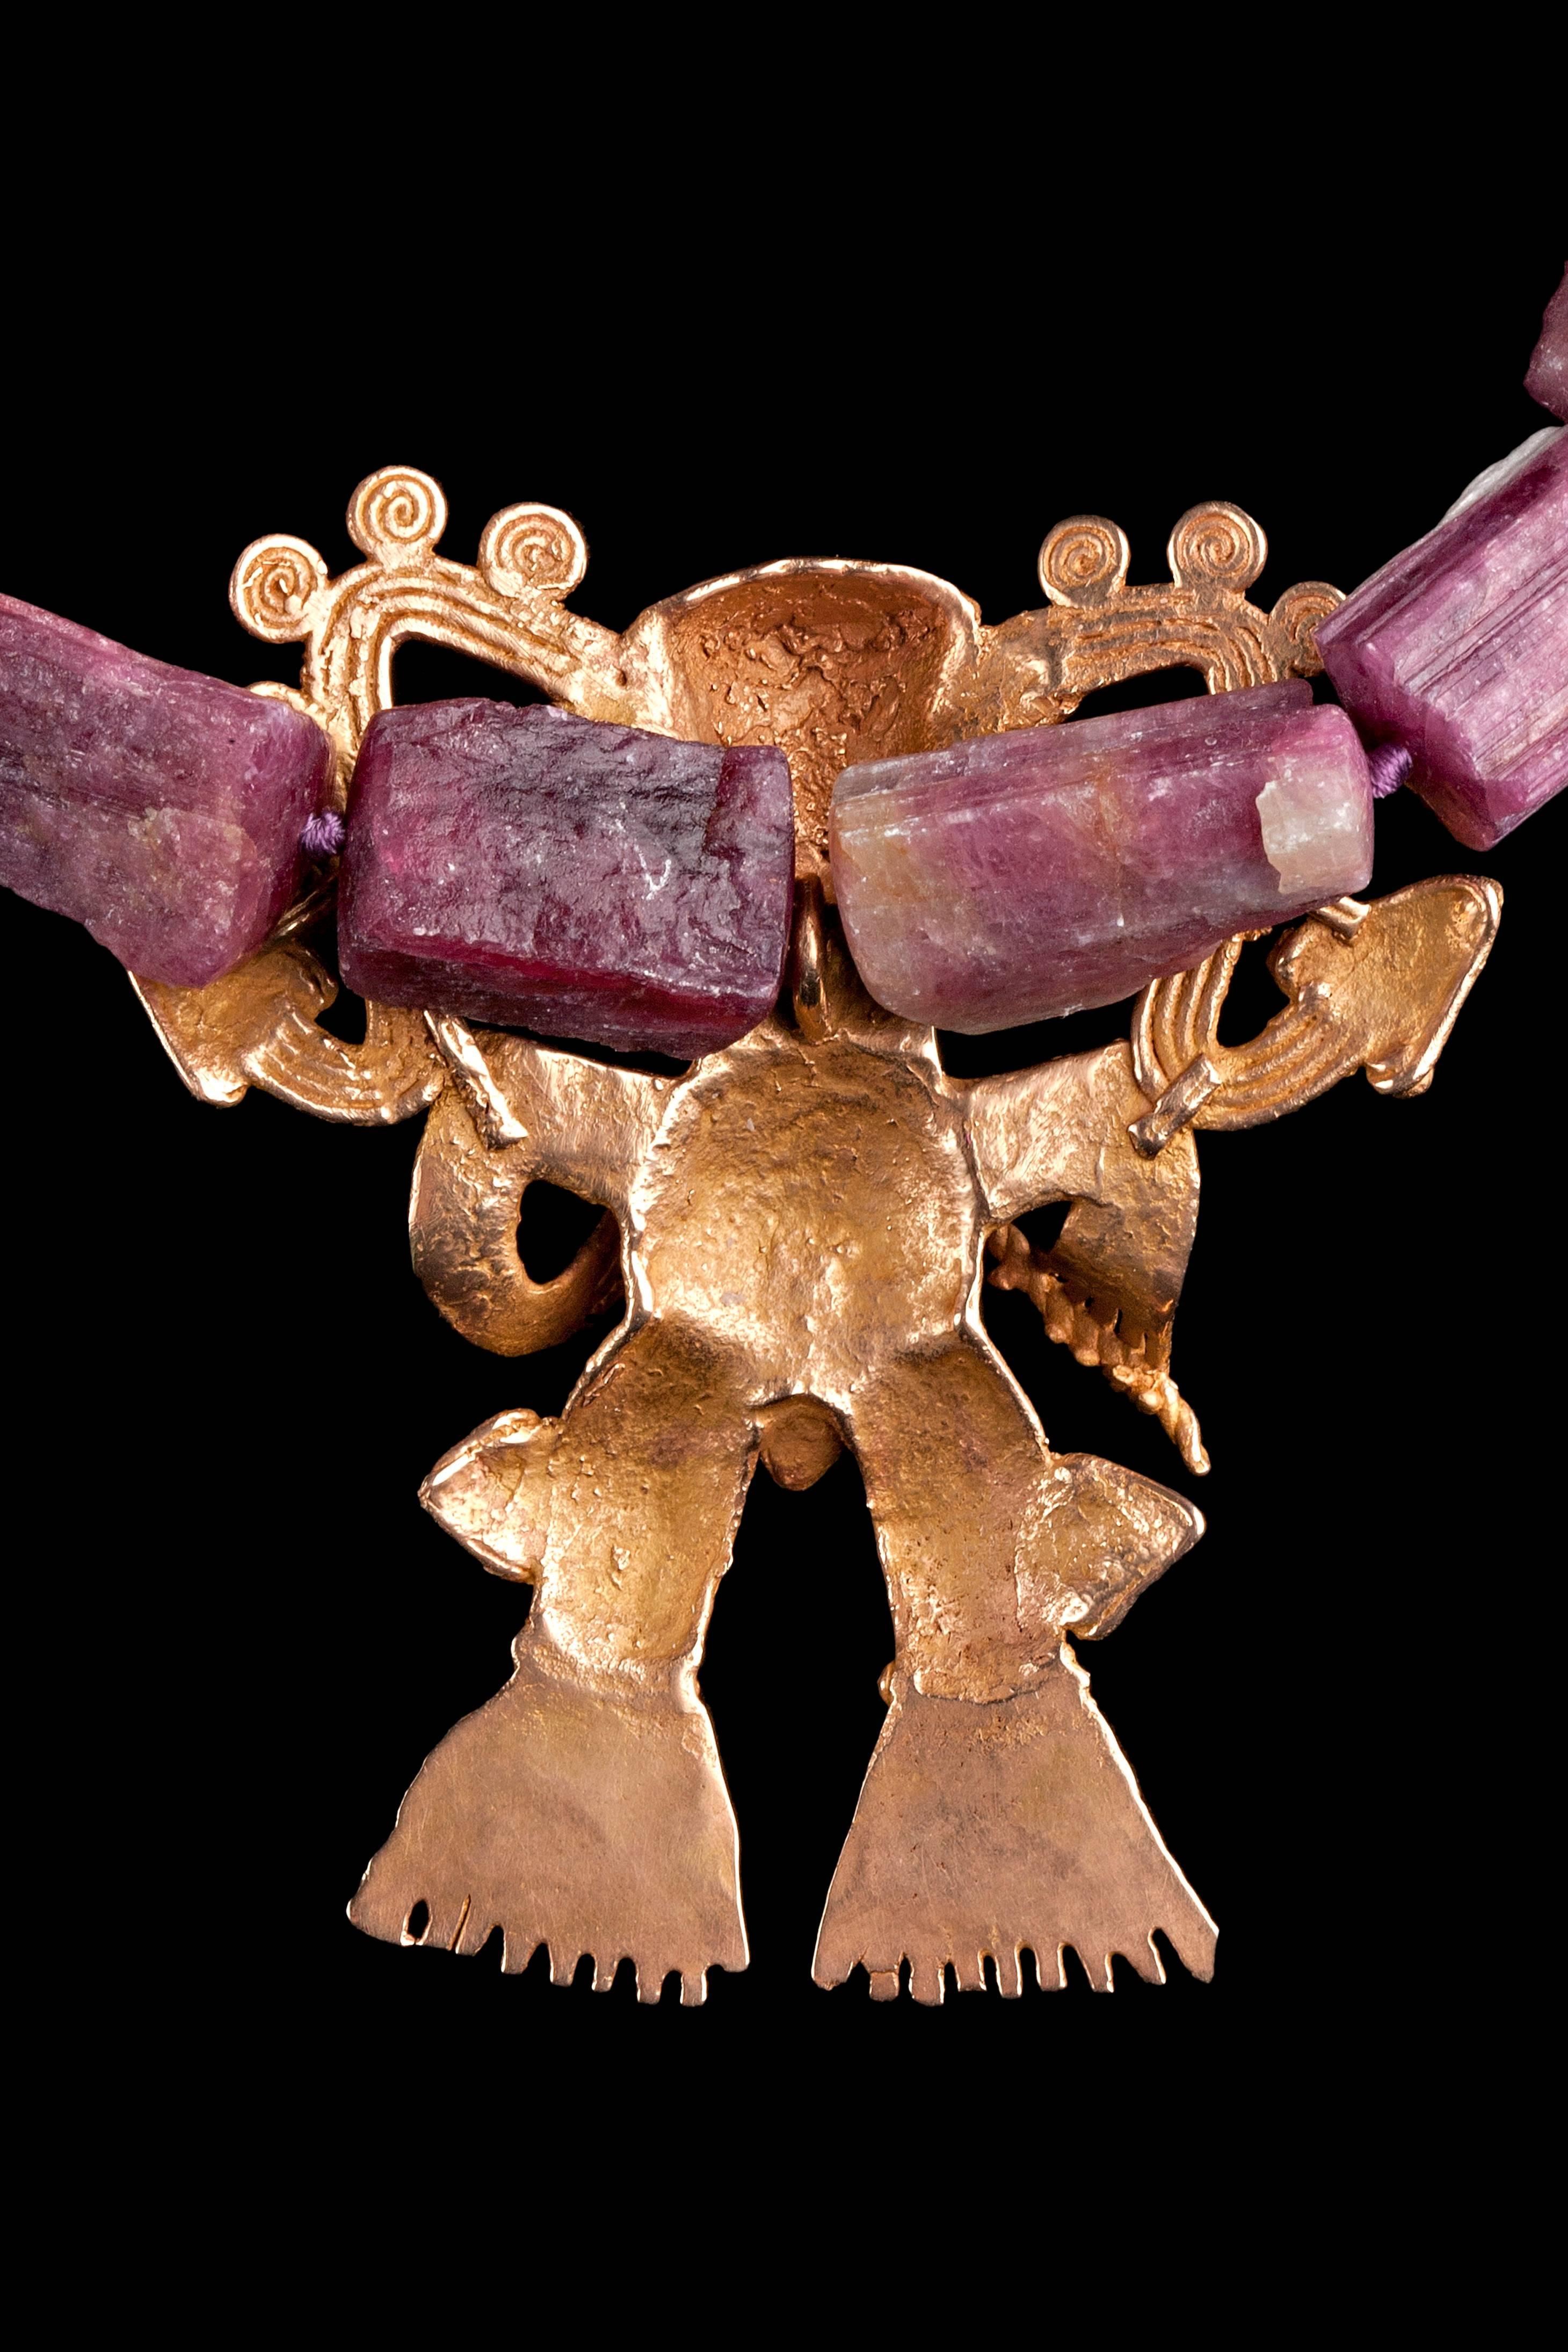 Natural pink tourmaline necklace (167 gms) with rare gold Veraguas/Diquis supernatural drummer Ca. 700 to 1400 AD. Very fine example of ancient, Precolumbian goldwork form Central America, either Costa Rica or Panama. 111 grams of blush pink gold